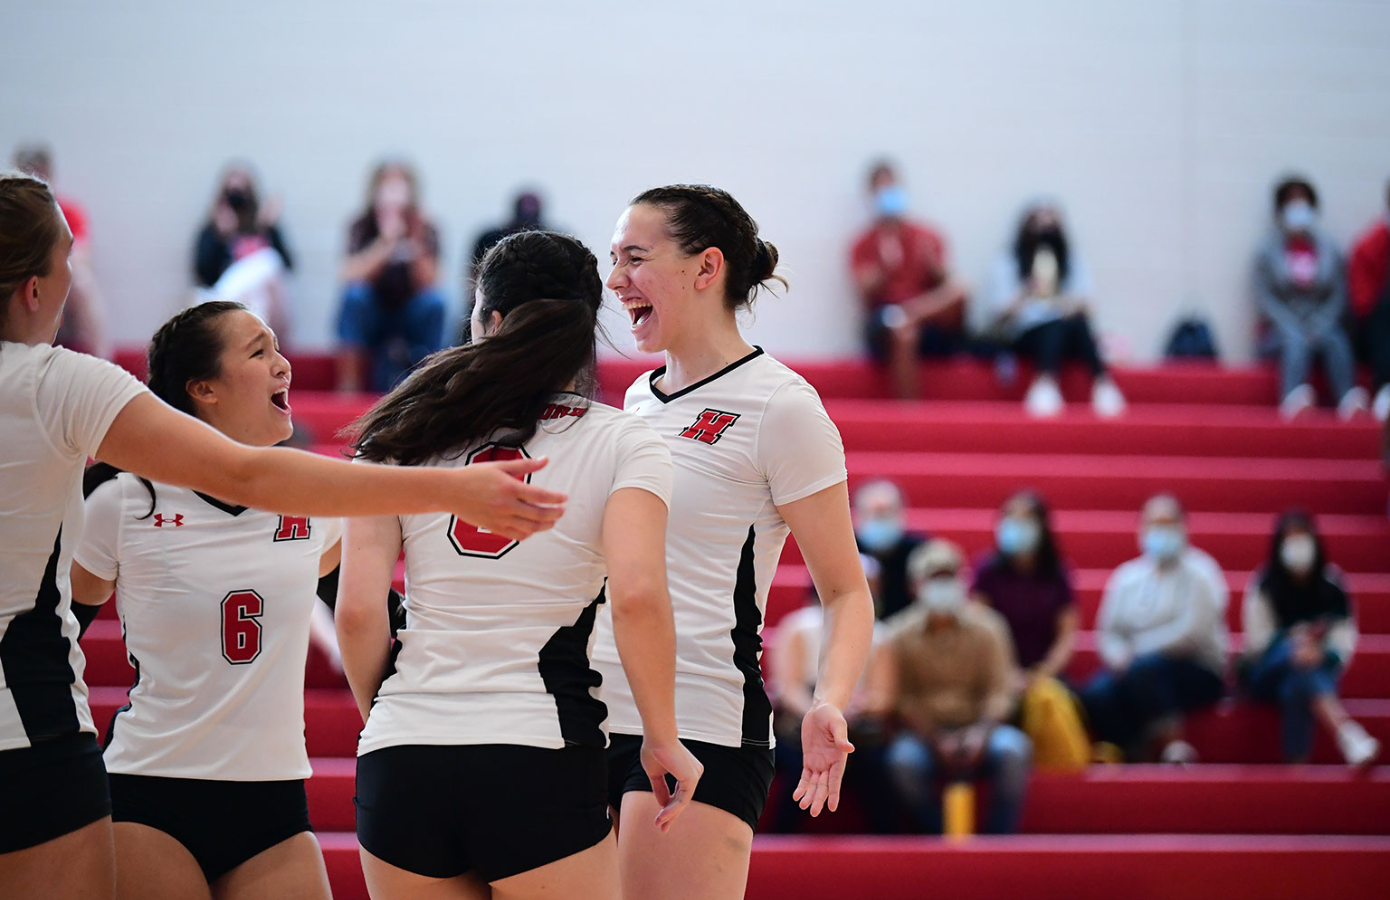 Volleyball Sweeps Widener, Improves to 10-1